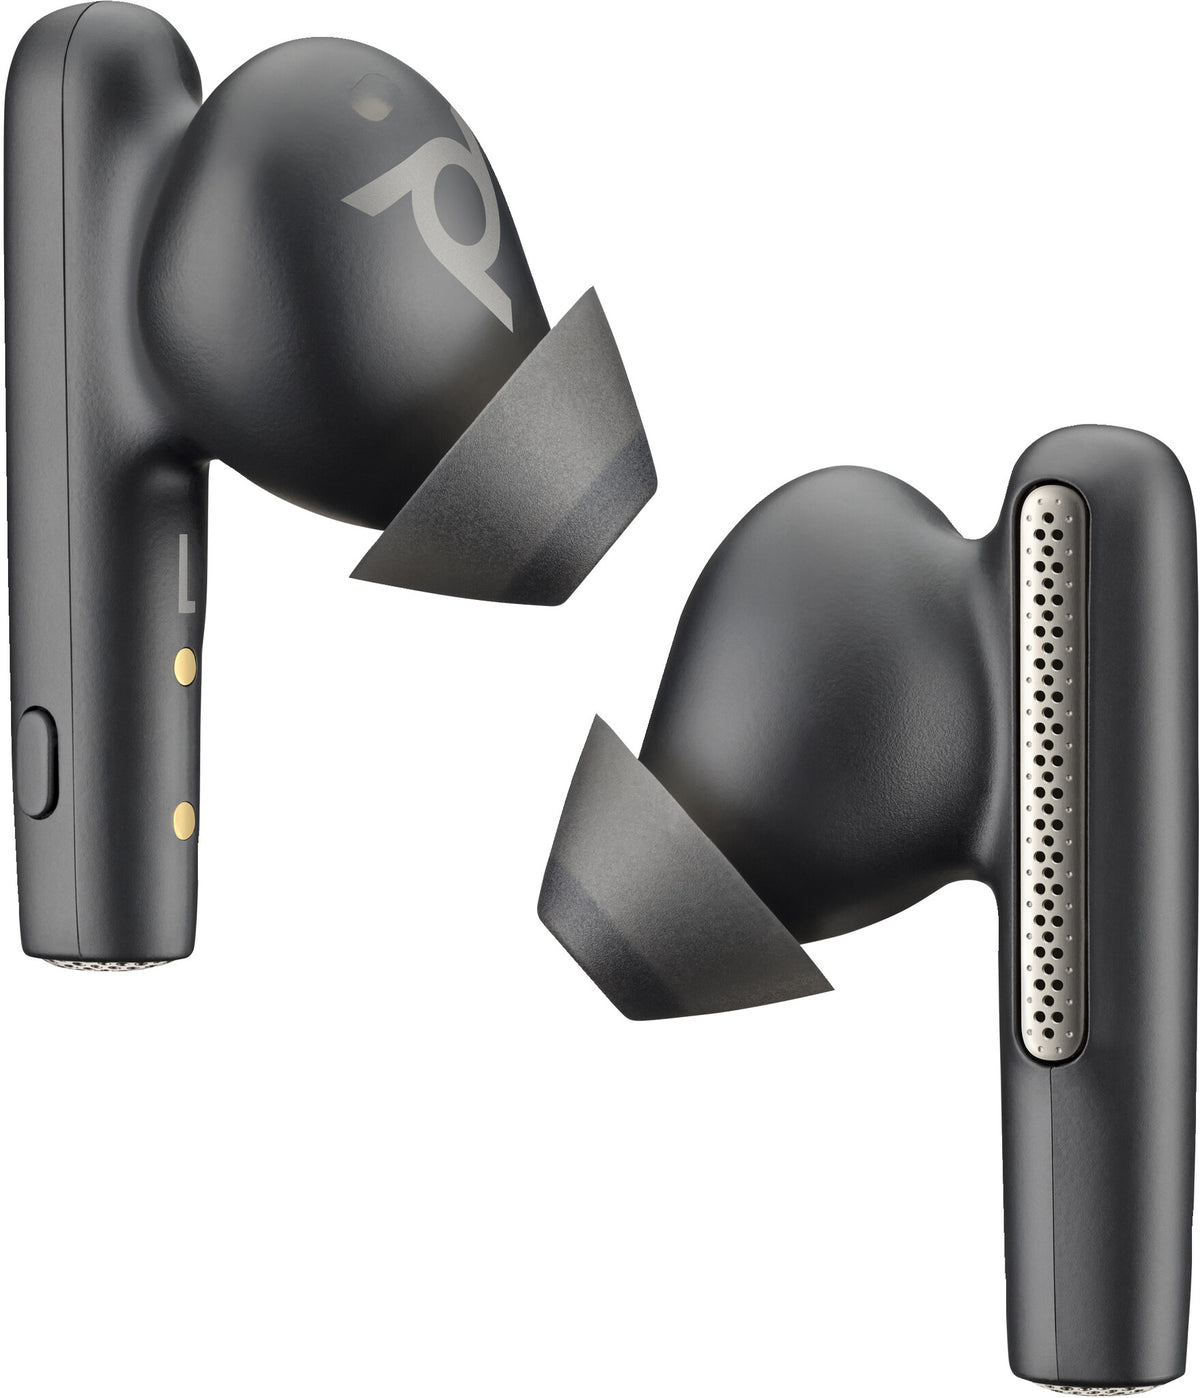 POLY Voyager Free 60 UC - True Wireless Stereo (TWS) Earbuds in  Carbon Black + BT700 USB-A Adapter + Basic Charge Case